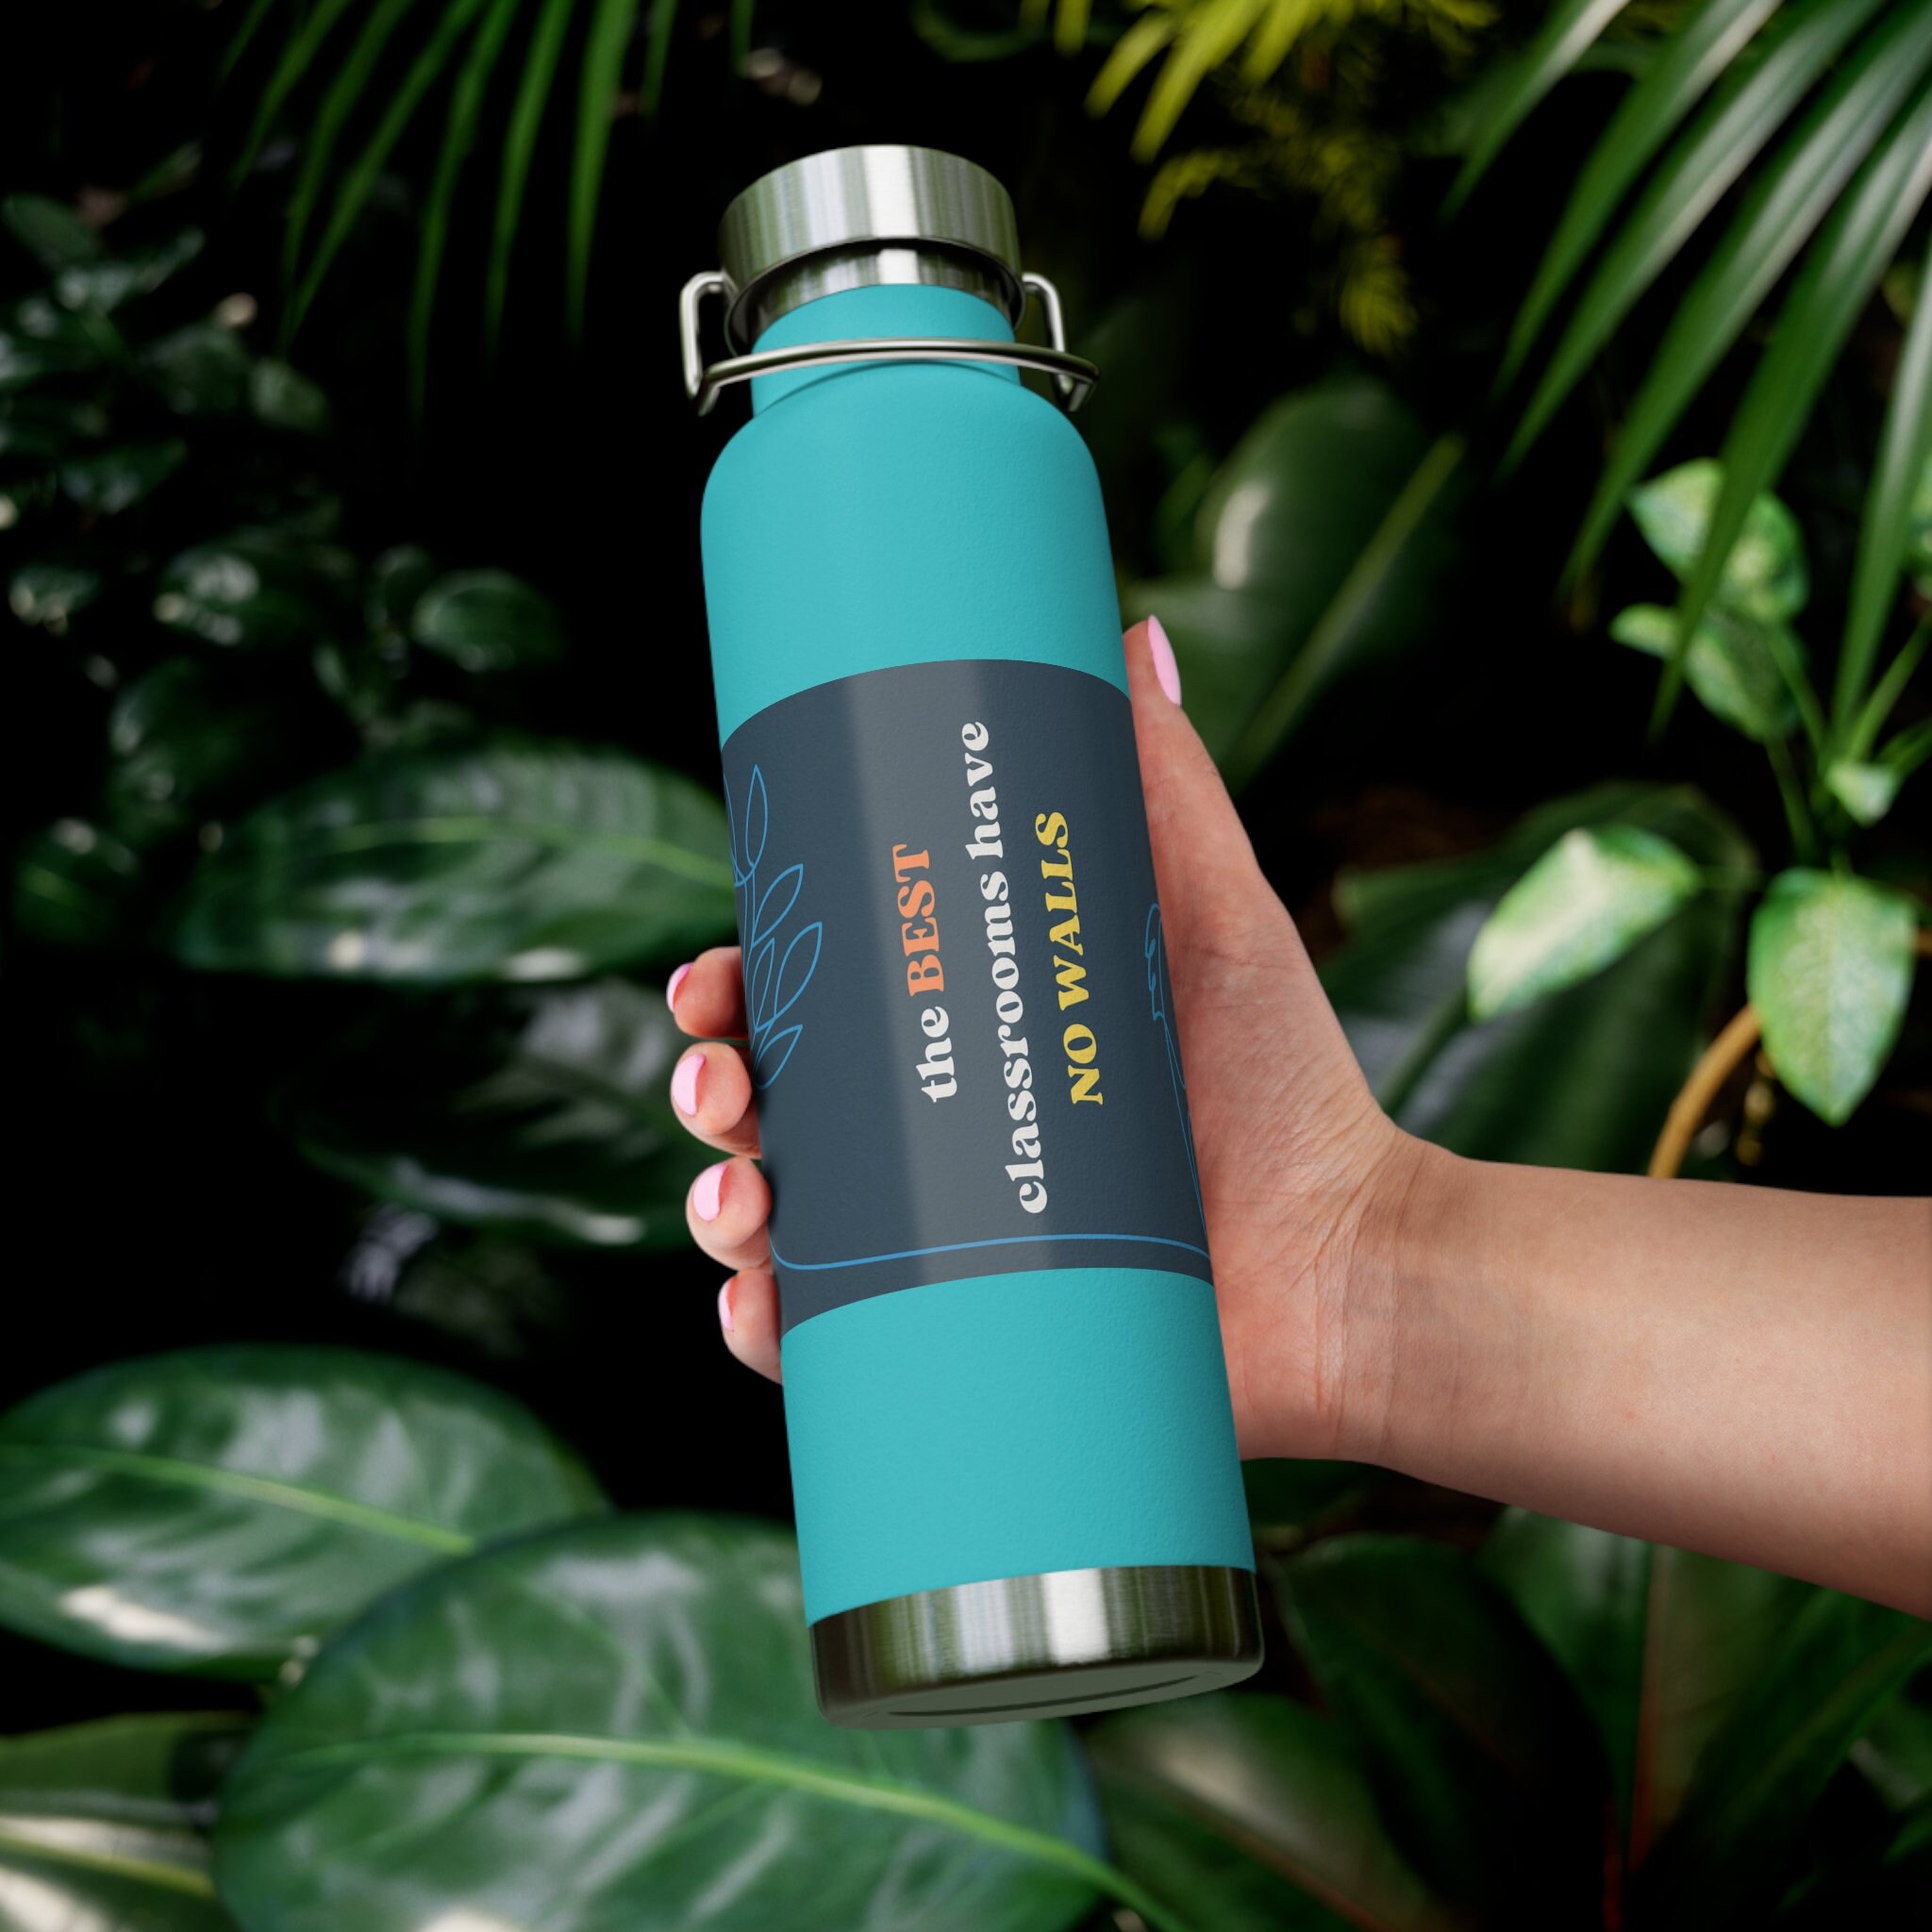 Copper Hot And Cold Water Bottle 750ml